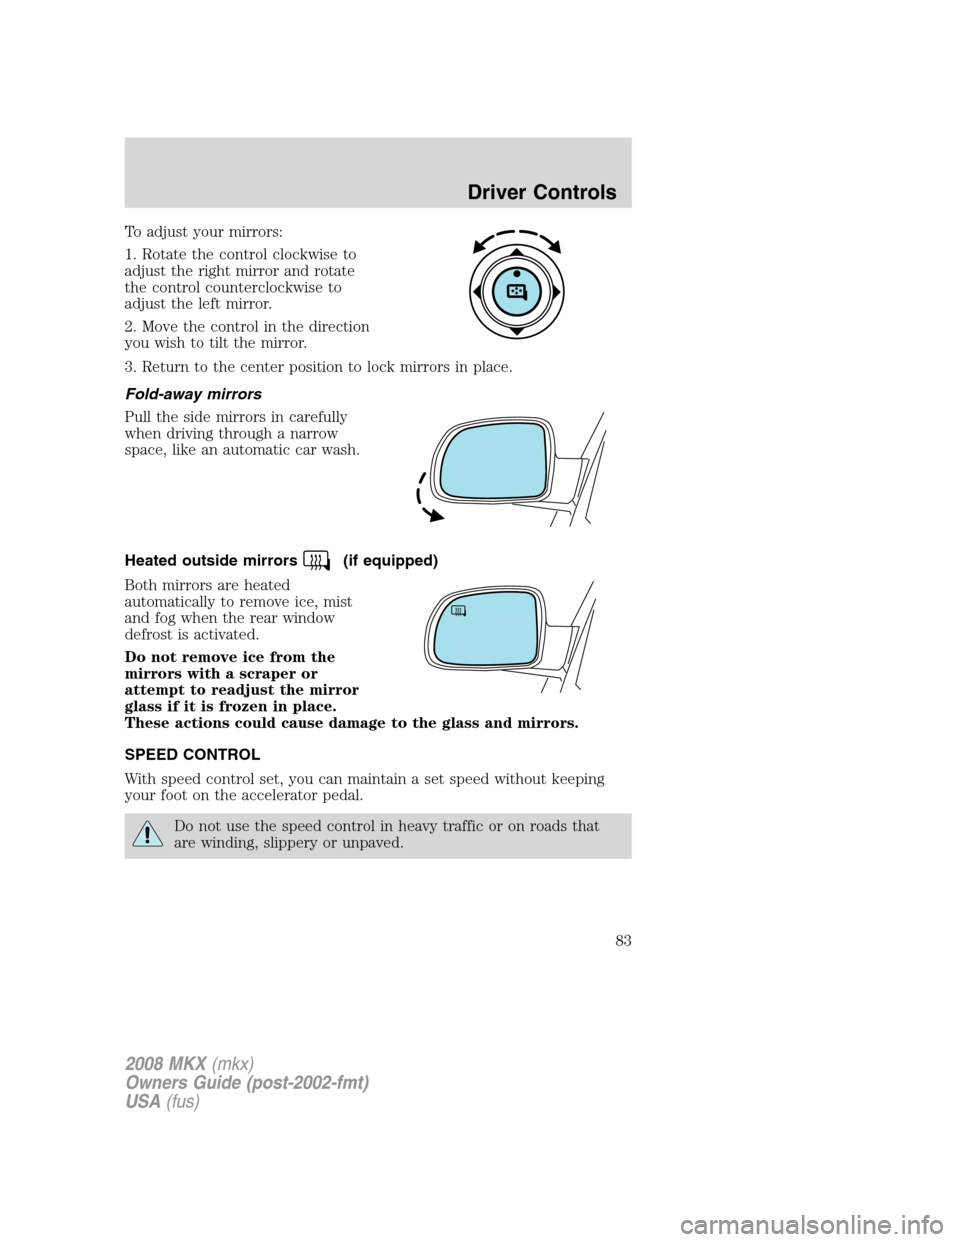 LINCOLN MKX 2008  Owners Manual To adjust your mirrors:
1. Rotate the control clockwise to
adjust the right mirror and rotate
the control counterclockwise to
adjust the left mirror.
2. Move the control in the direction
you wish to t